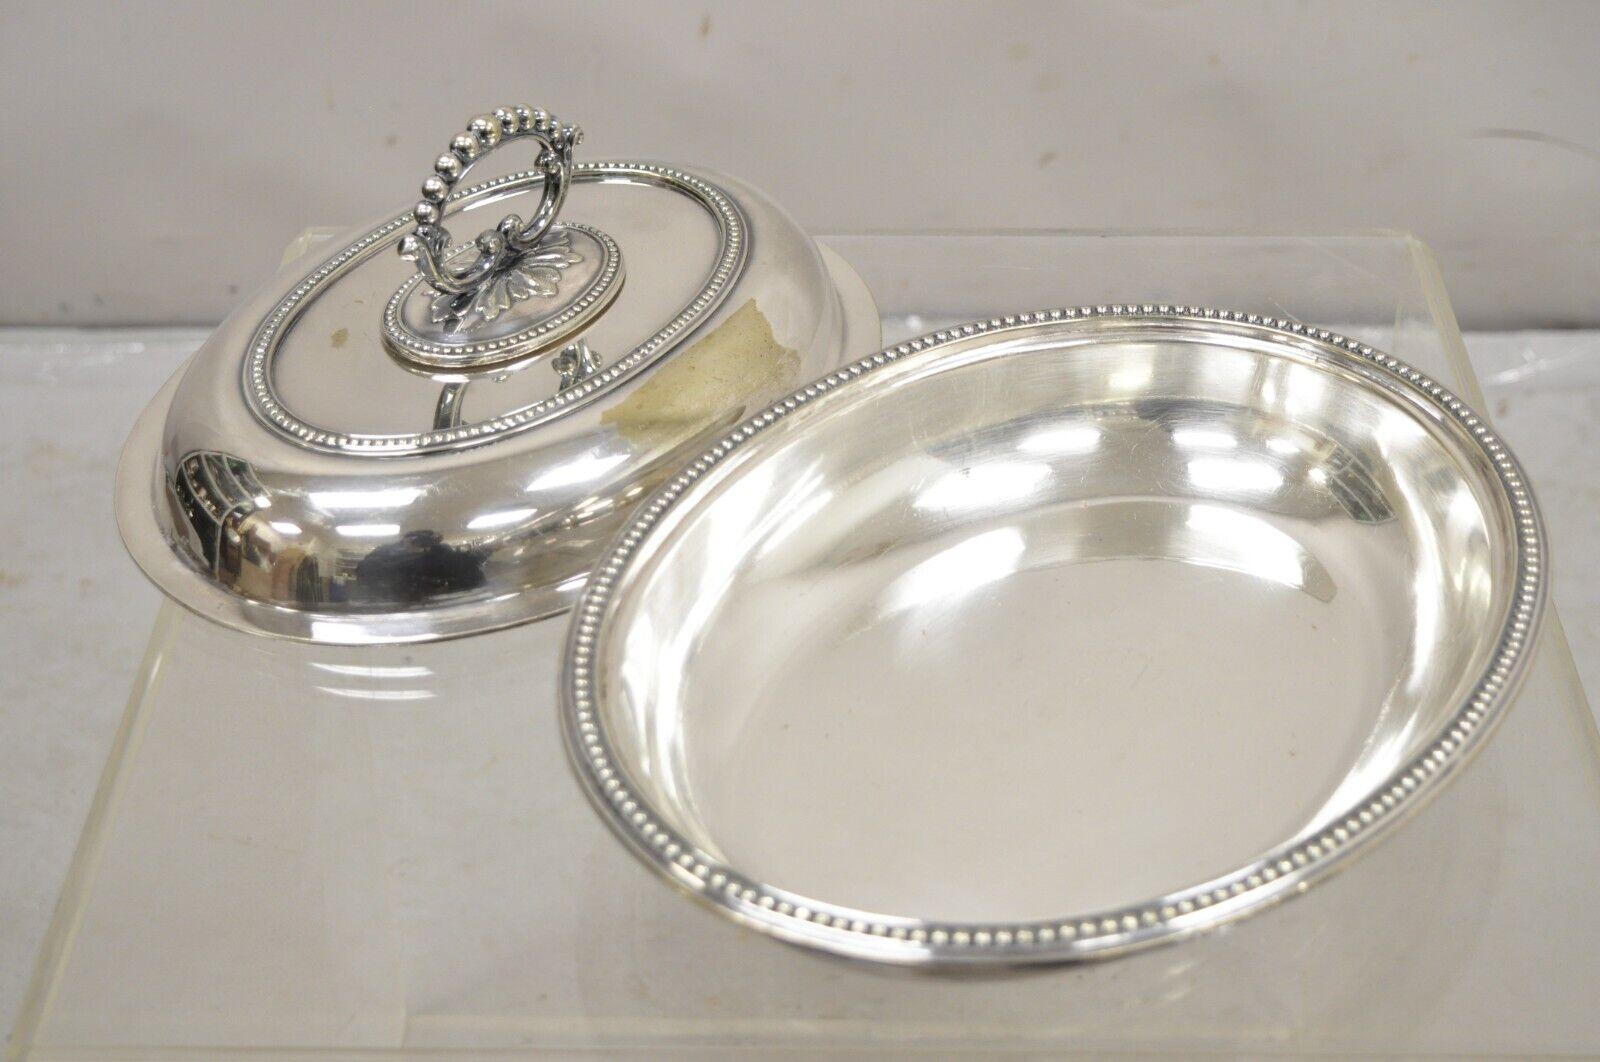 Mappin & Webb's Prince's Plate English Sheffield Silver Plated Covered Dish im Angebot 3